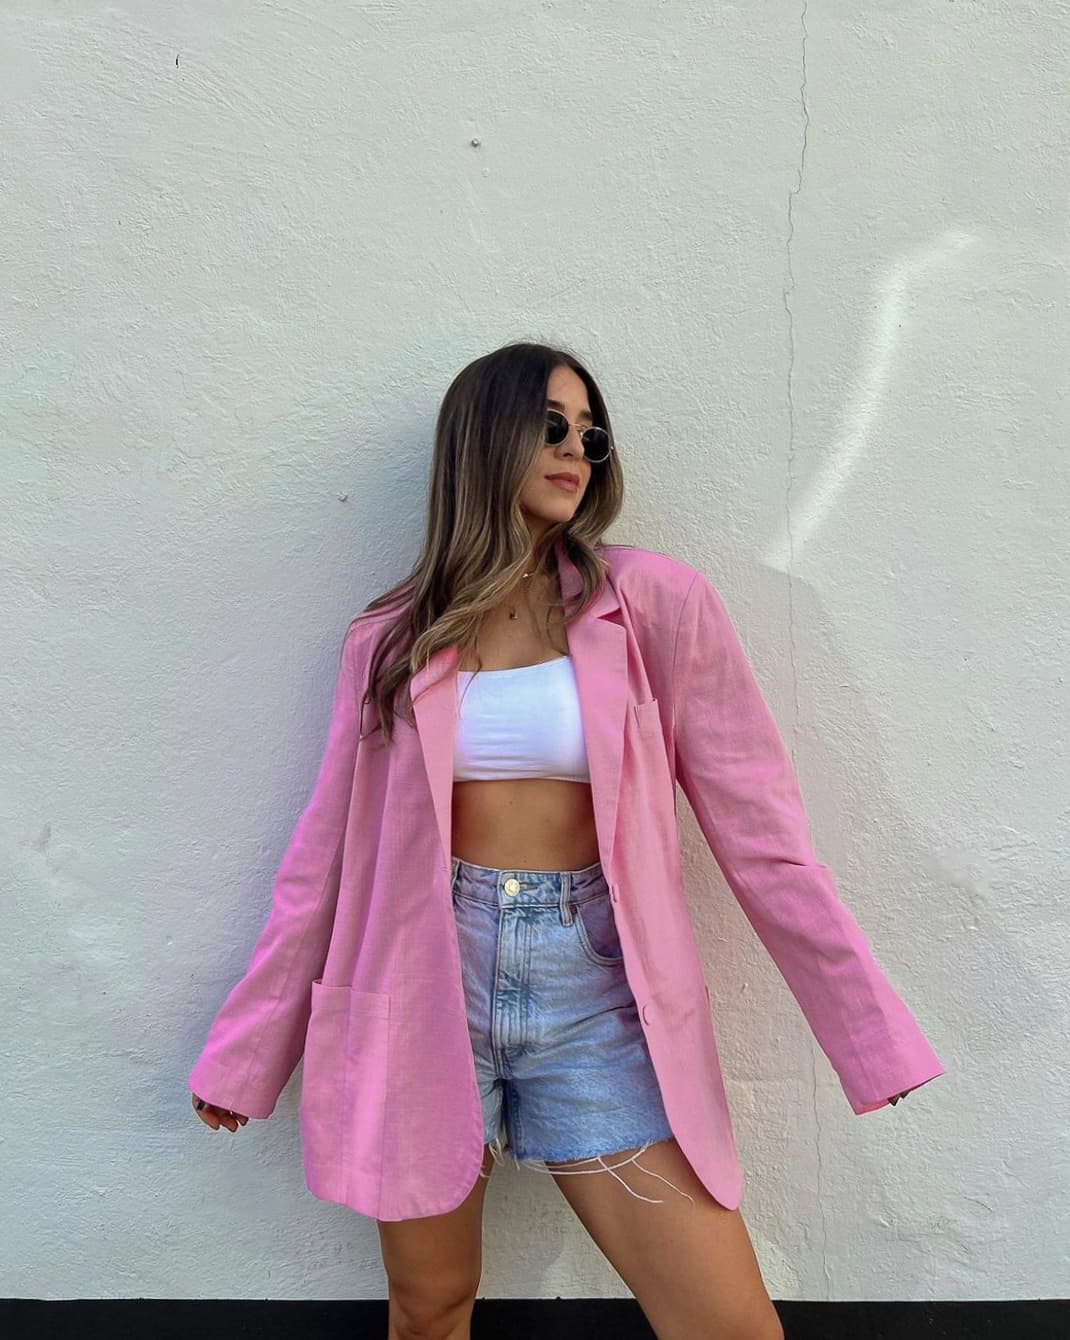 A woman wearing light blue denim shorts, a white bandeau top, and an oversized pink blazer with sunglasses